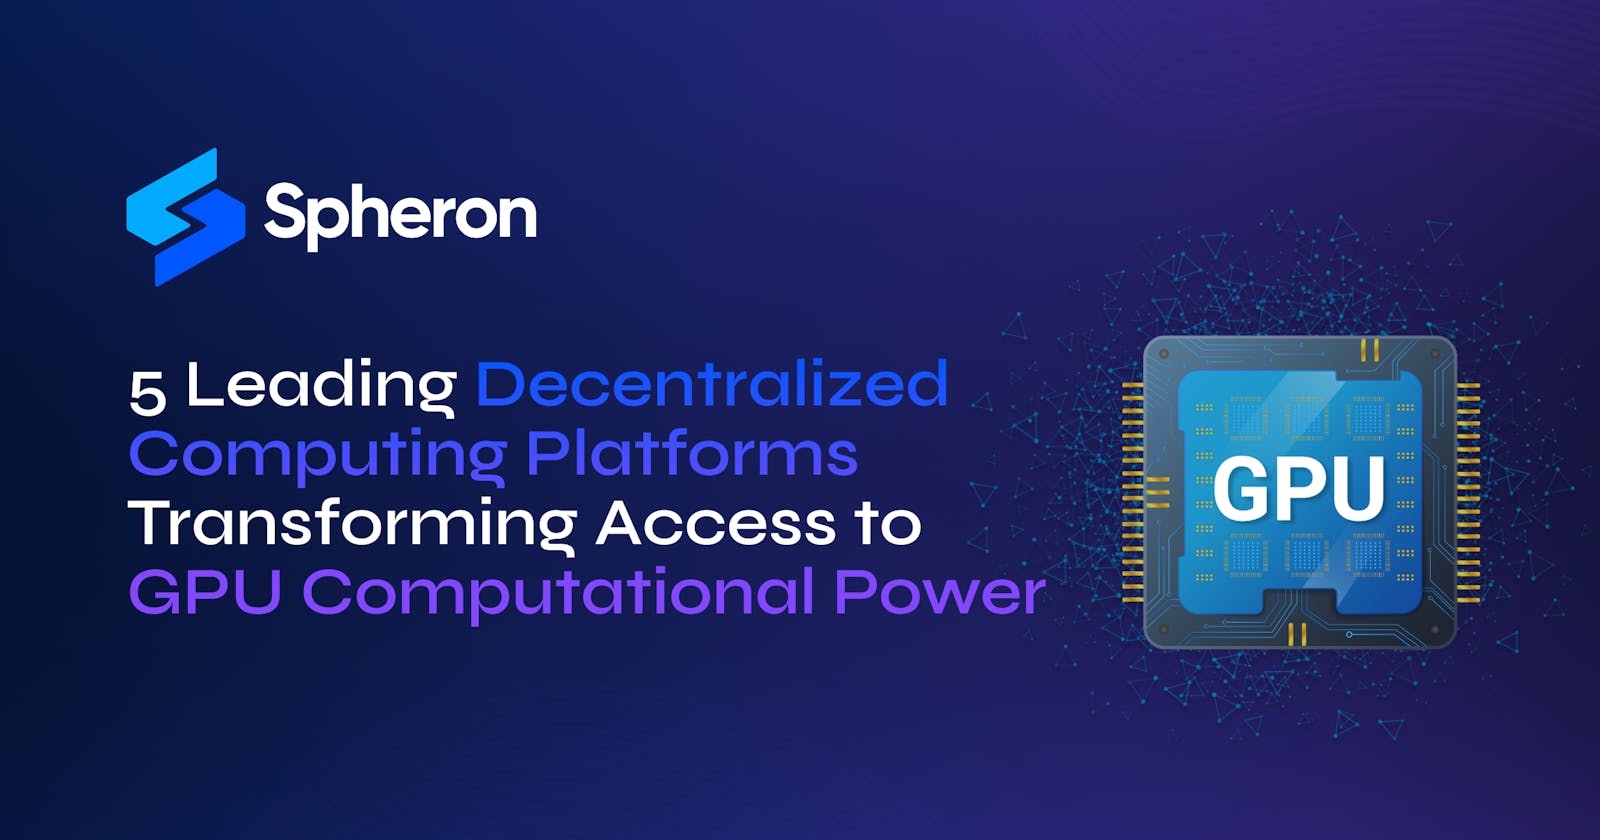 Unlocking the Potential of GPUs: 5 Leading Decentralized Computing Platforms Transforming Access to Computational Power